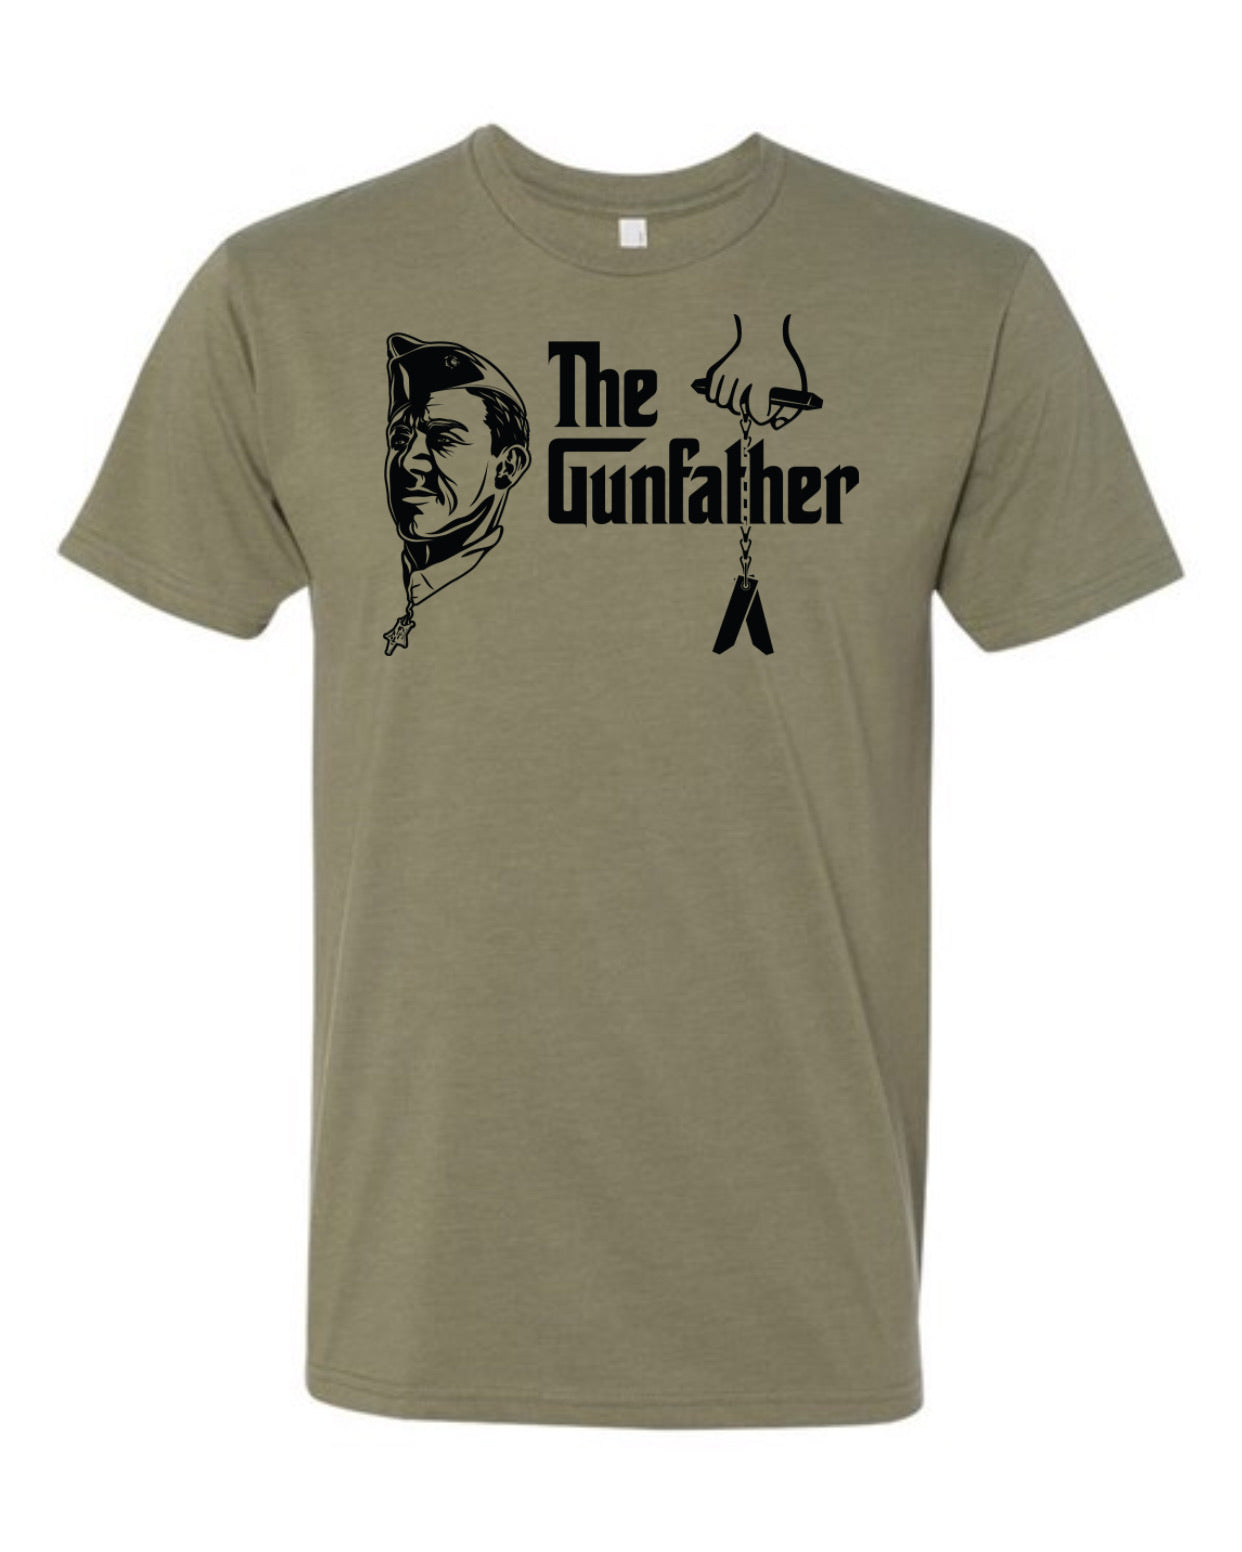 The Gunfather Tee